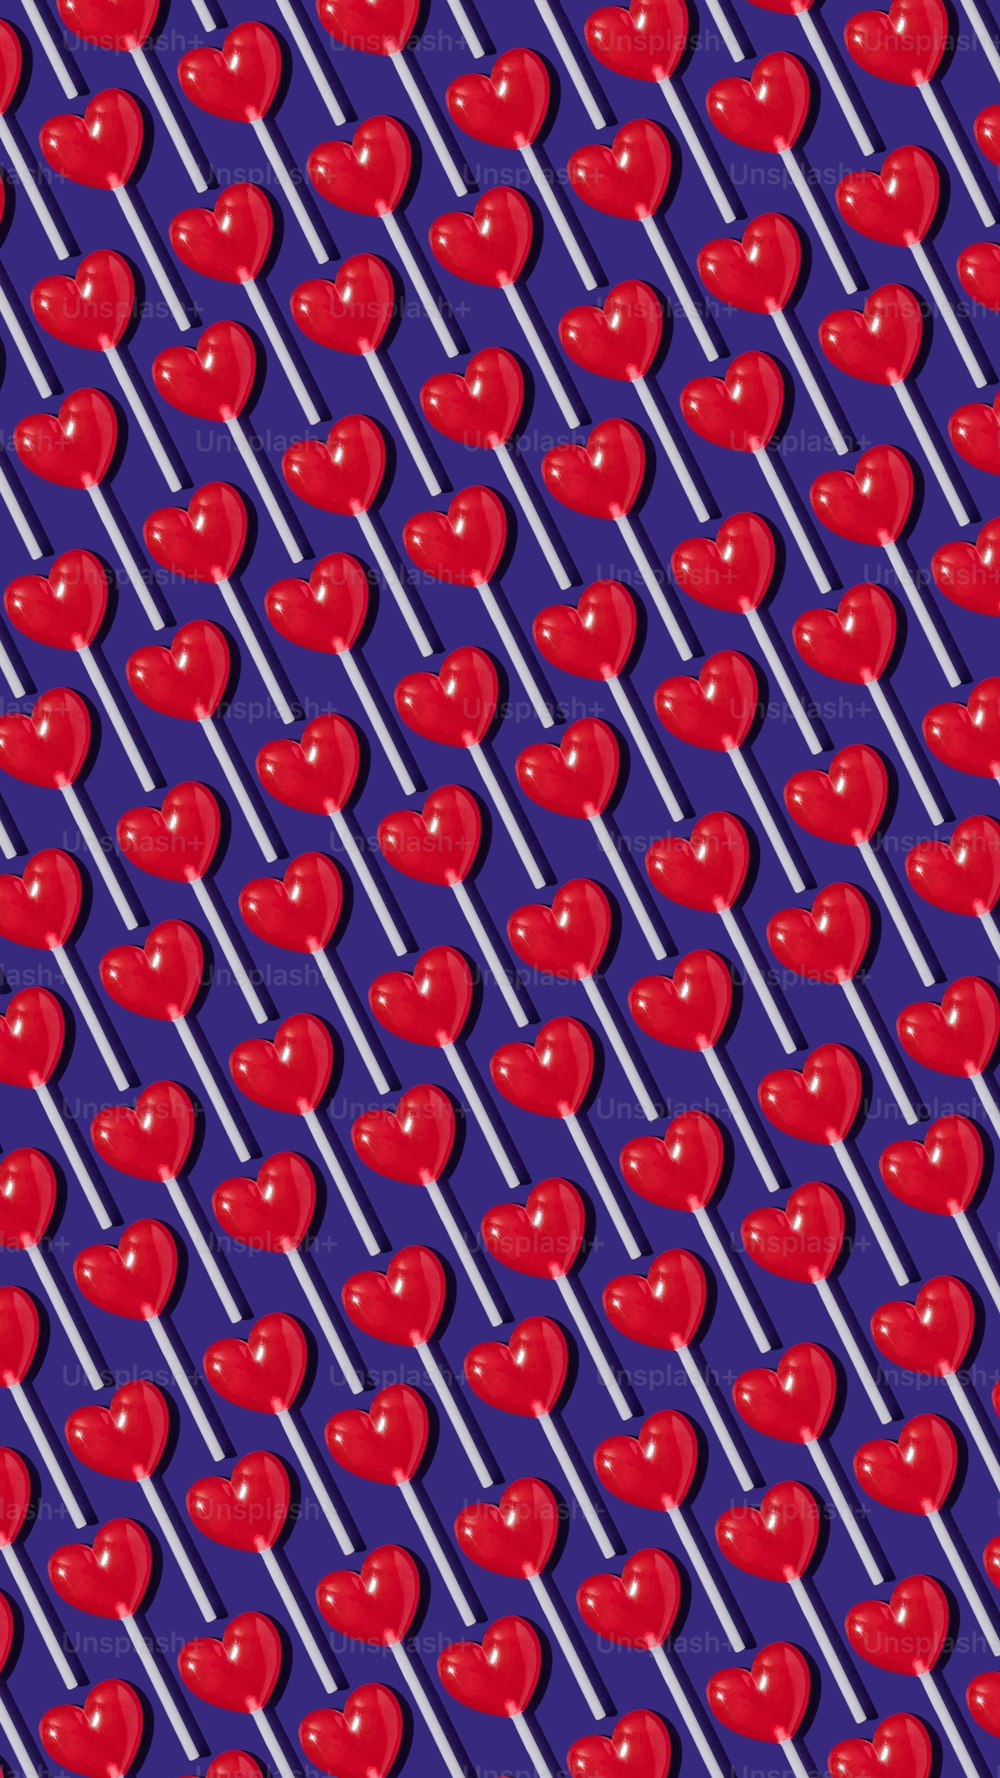 a pattern of red apples on a purple background